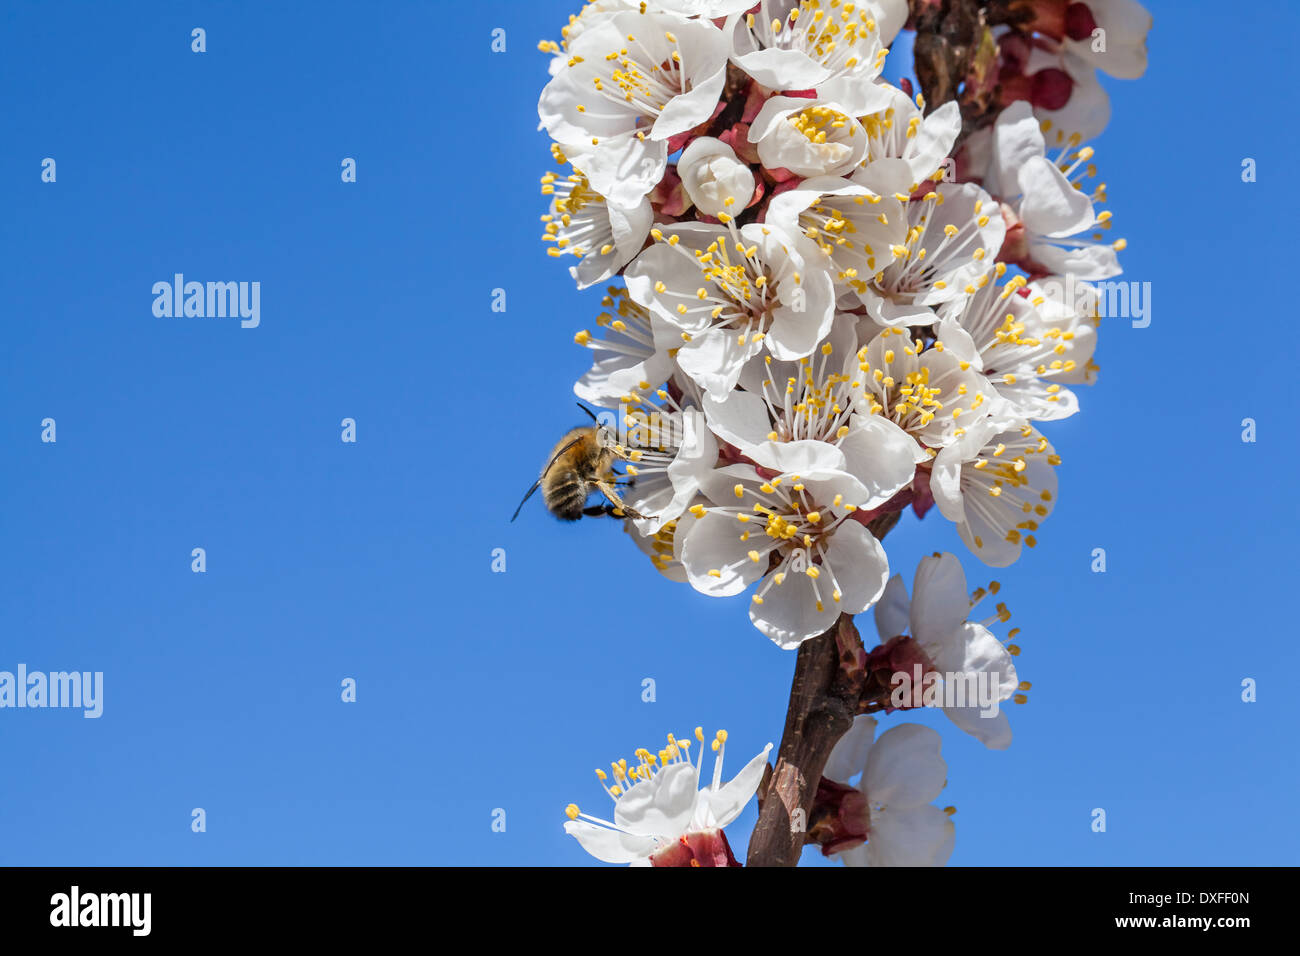 Close-up photograph of spring blossoms and honey bee Stock Photo